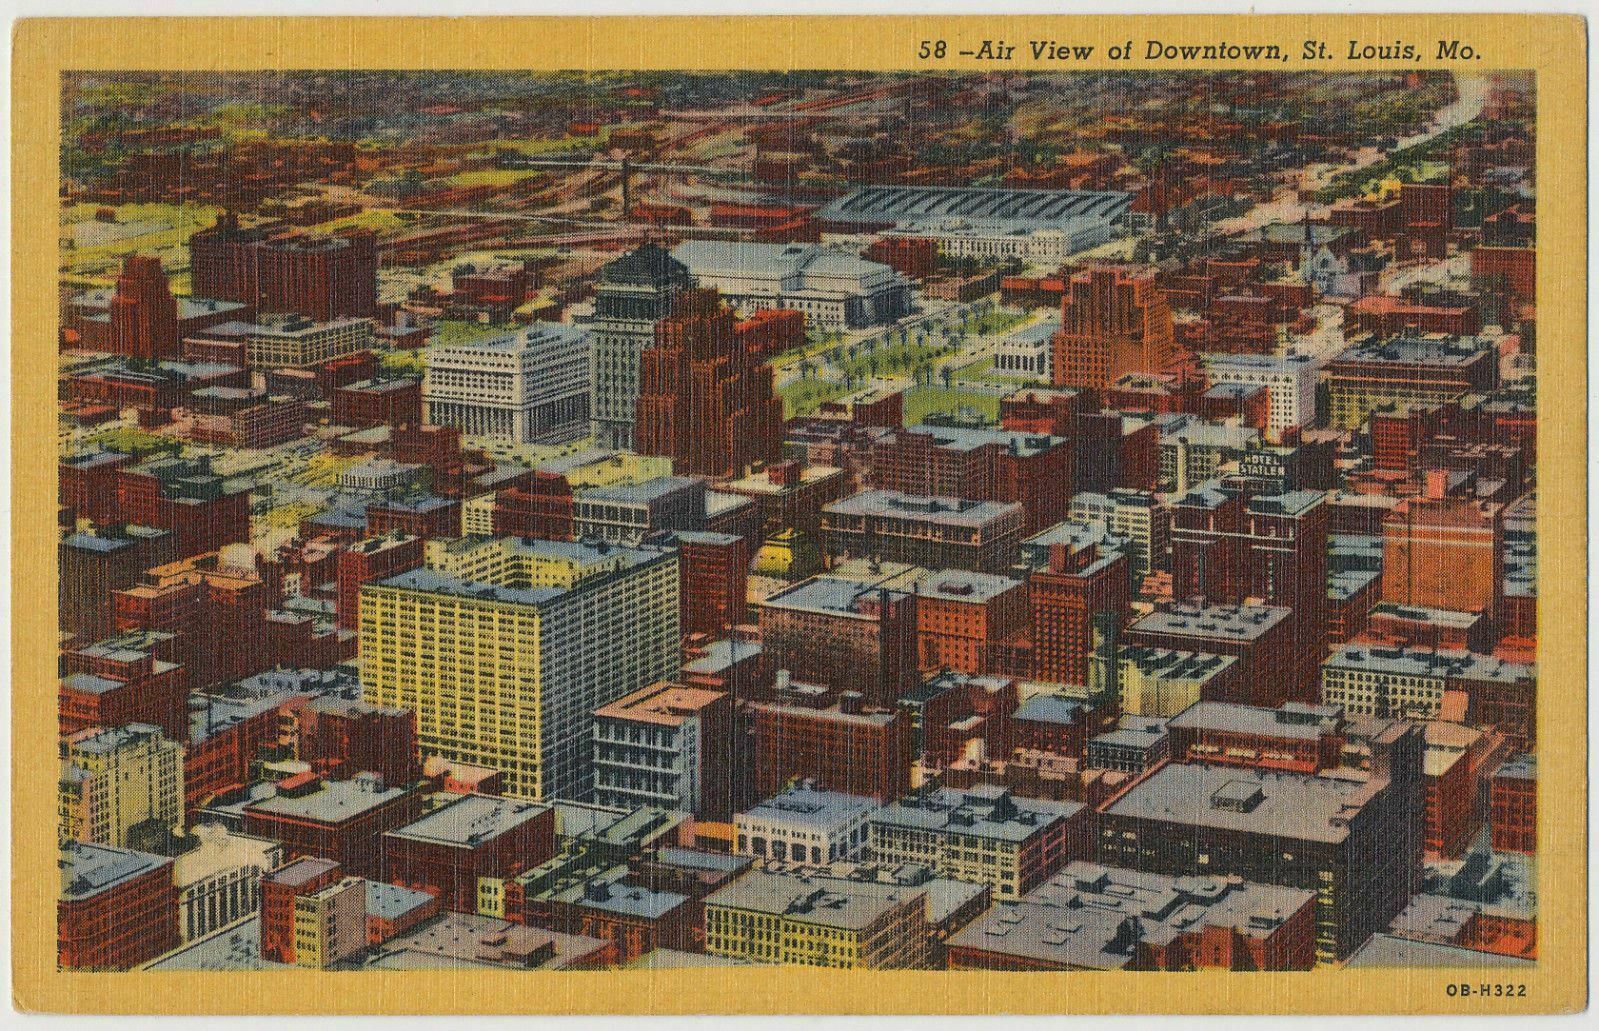 Air View of Downtown St. Louis, Missouri 1940